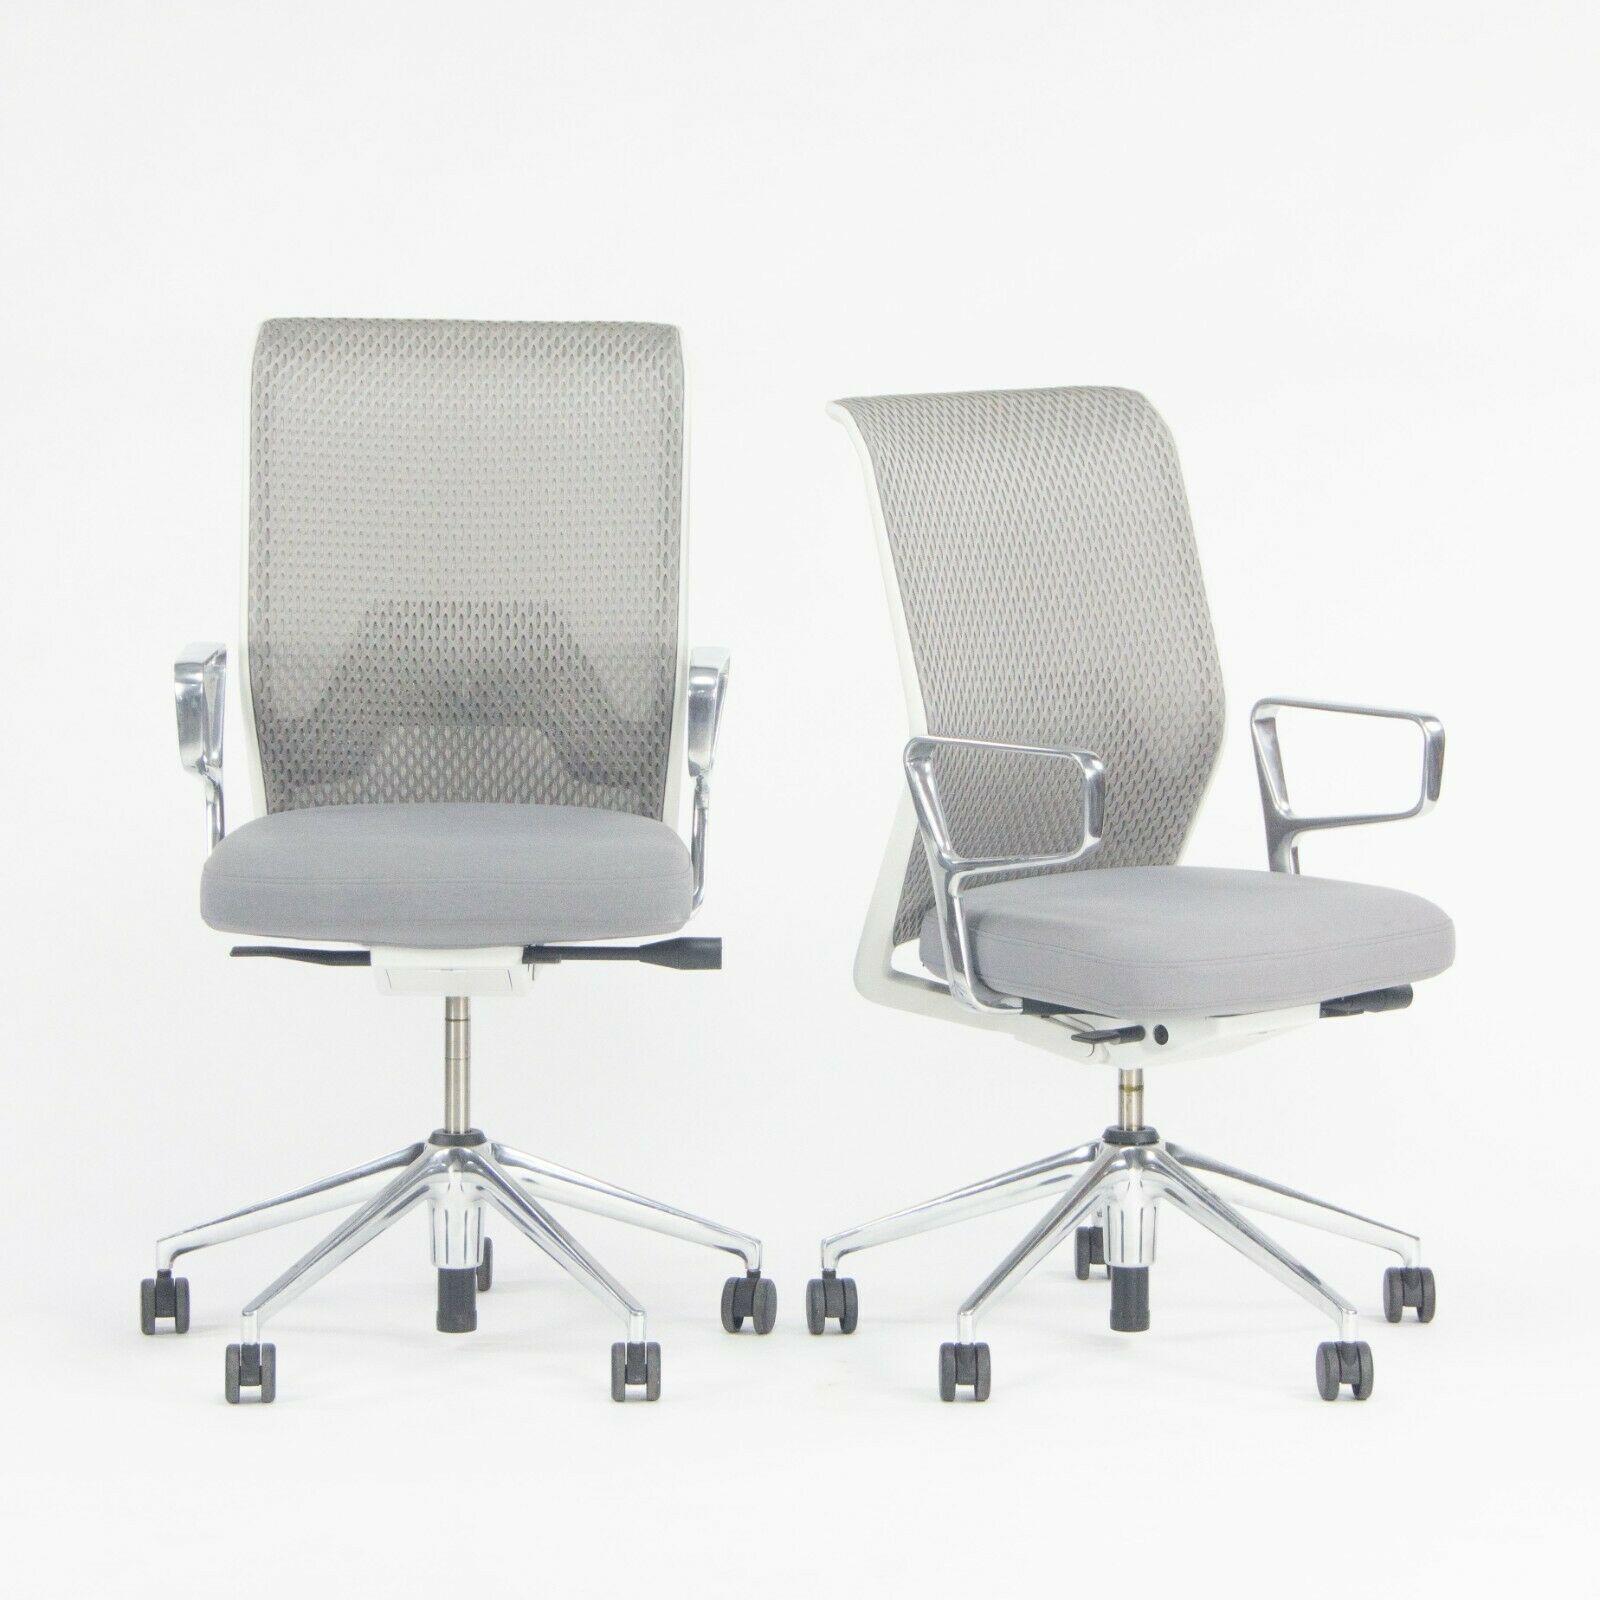 Listed for sale is a single (multiple chairs are available, but they are each sold separately) Vitra ID Mesh chair, designed by Antonio Citterio. These chairs are in gorgeous condition and show only light wear from use. It's important to note that